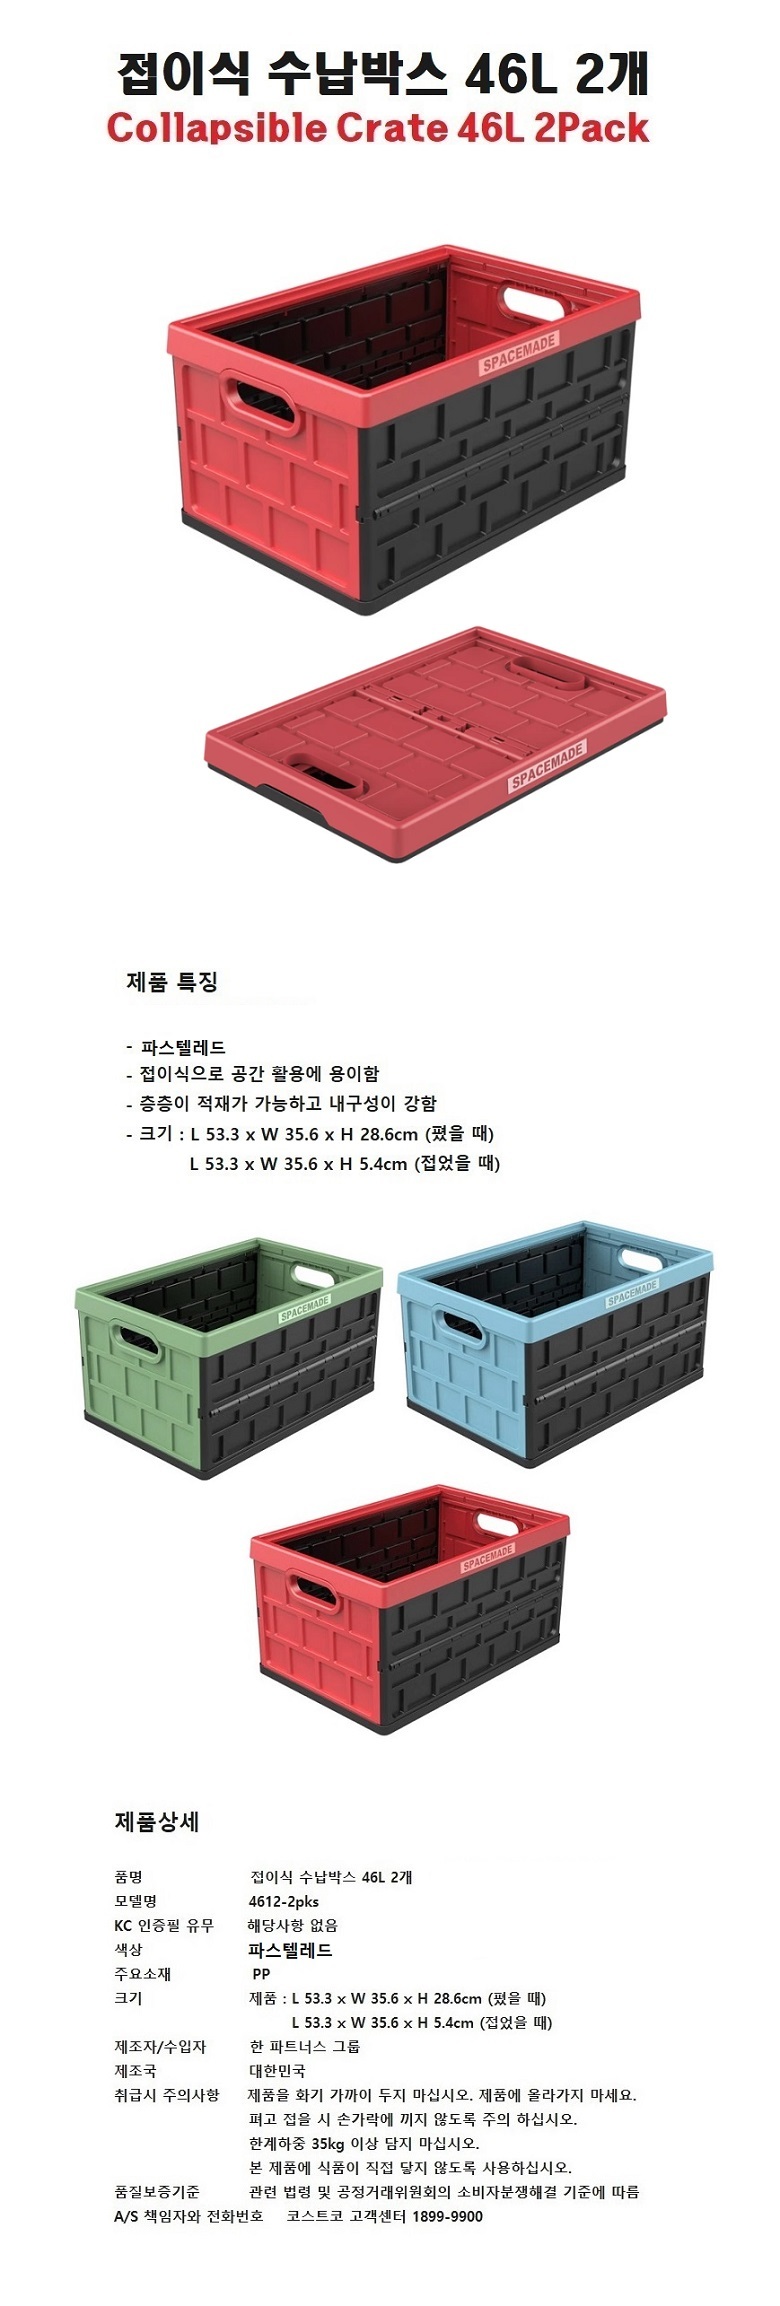 collapsible%20crate46l_red23990.jpg